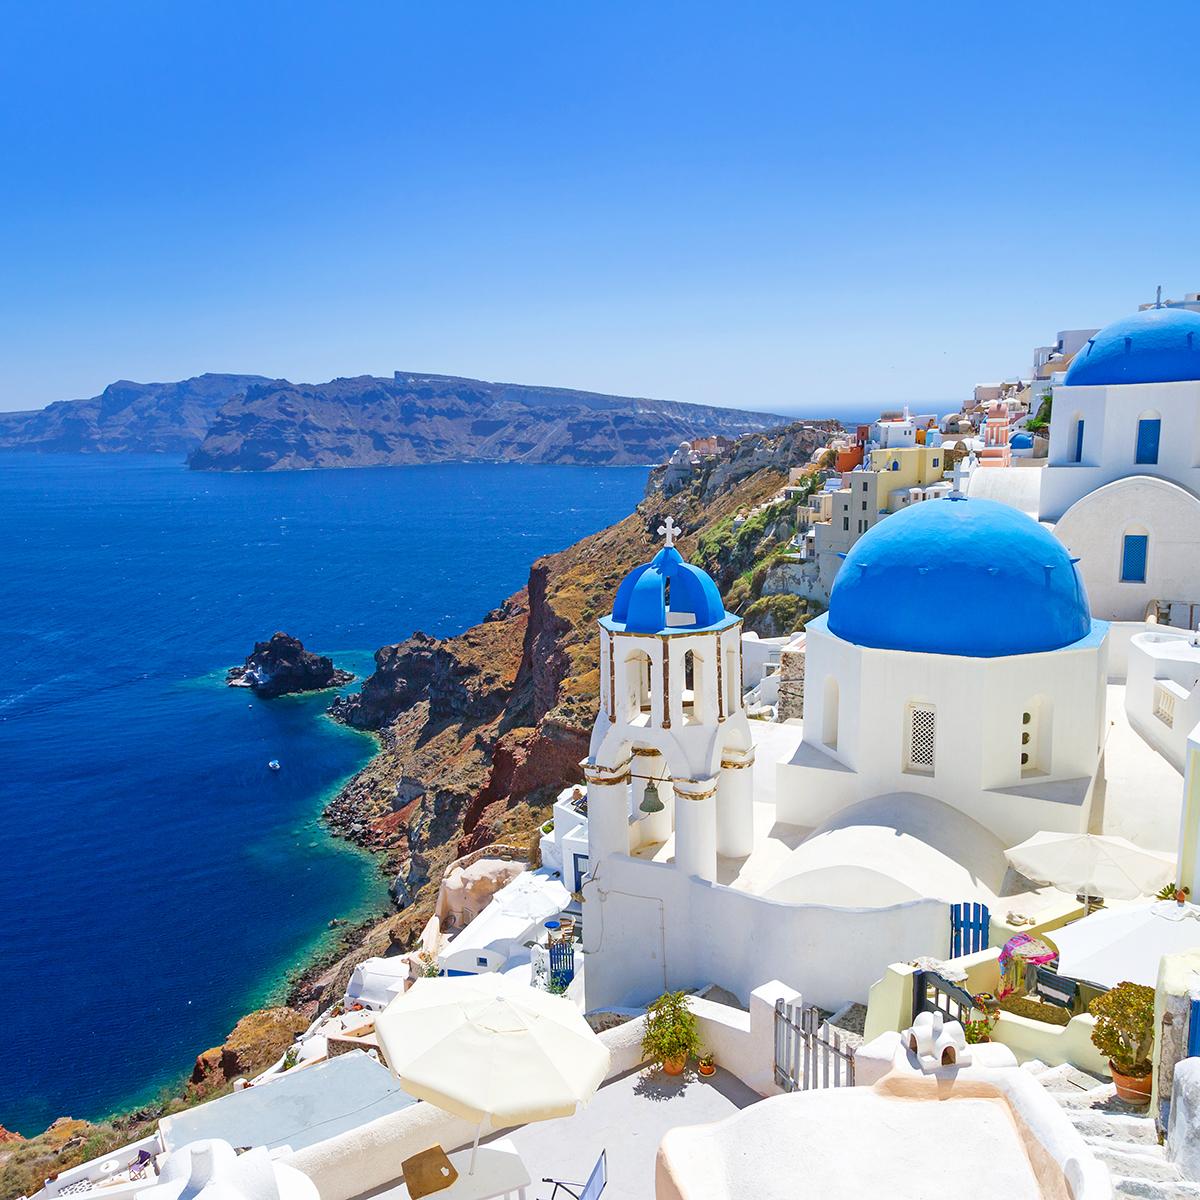 Breathtaking views of Greece - Insight Vacations tours can take you there